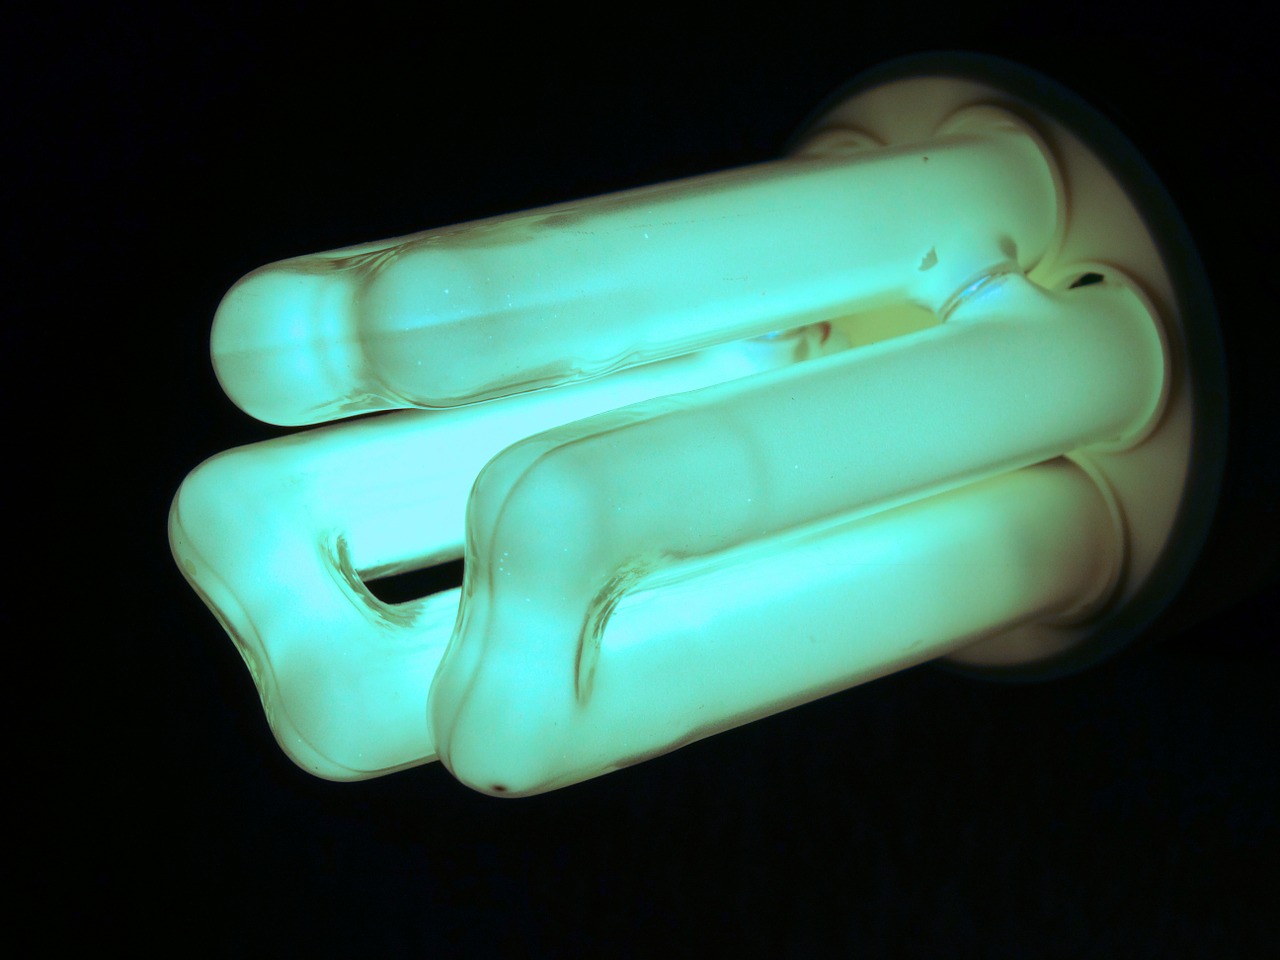 Compact fluorescent lamps use exactly the same technology as a full size tube, and can be used in similar ways